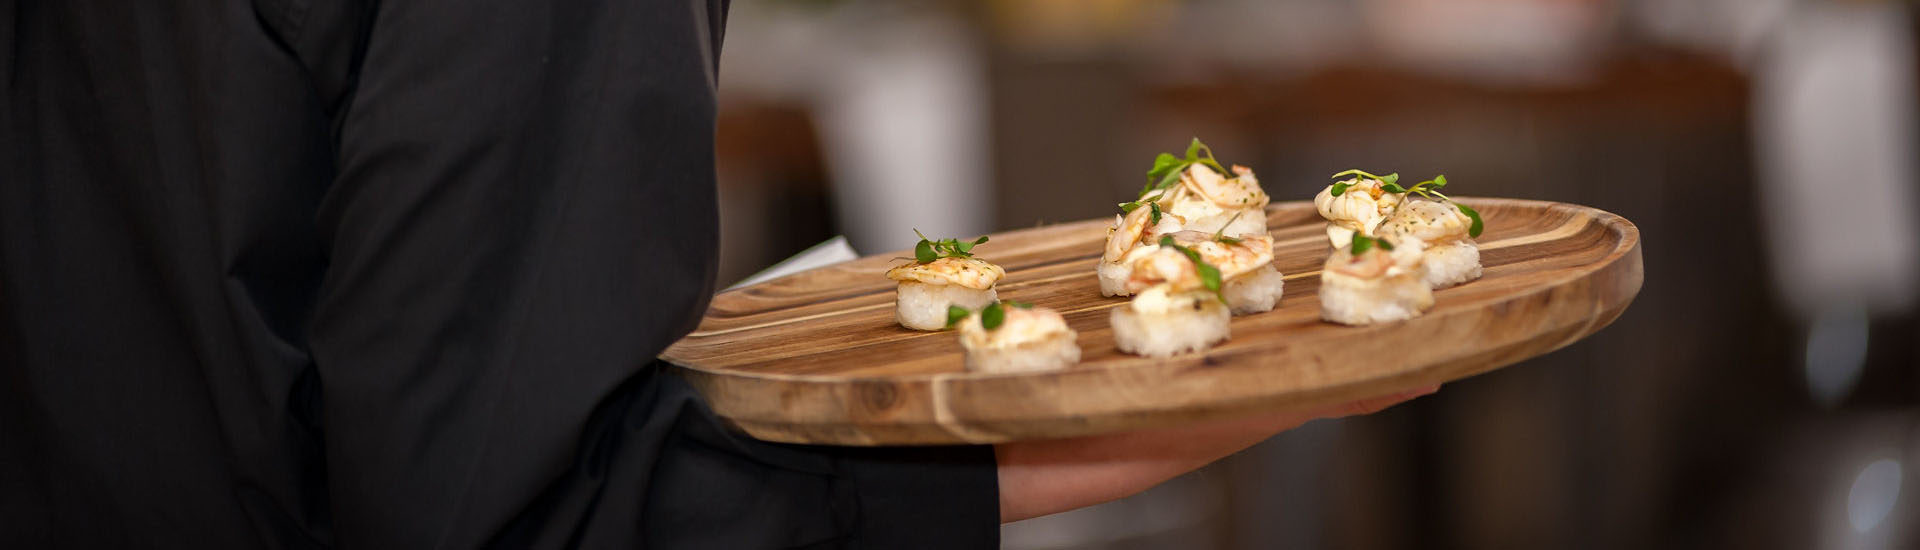 Close up of a server in a black uniform holding a circle wooden passing tray which has nigiri on it with a little bit of microgreens on top